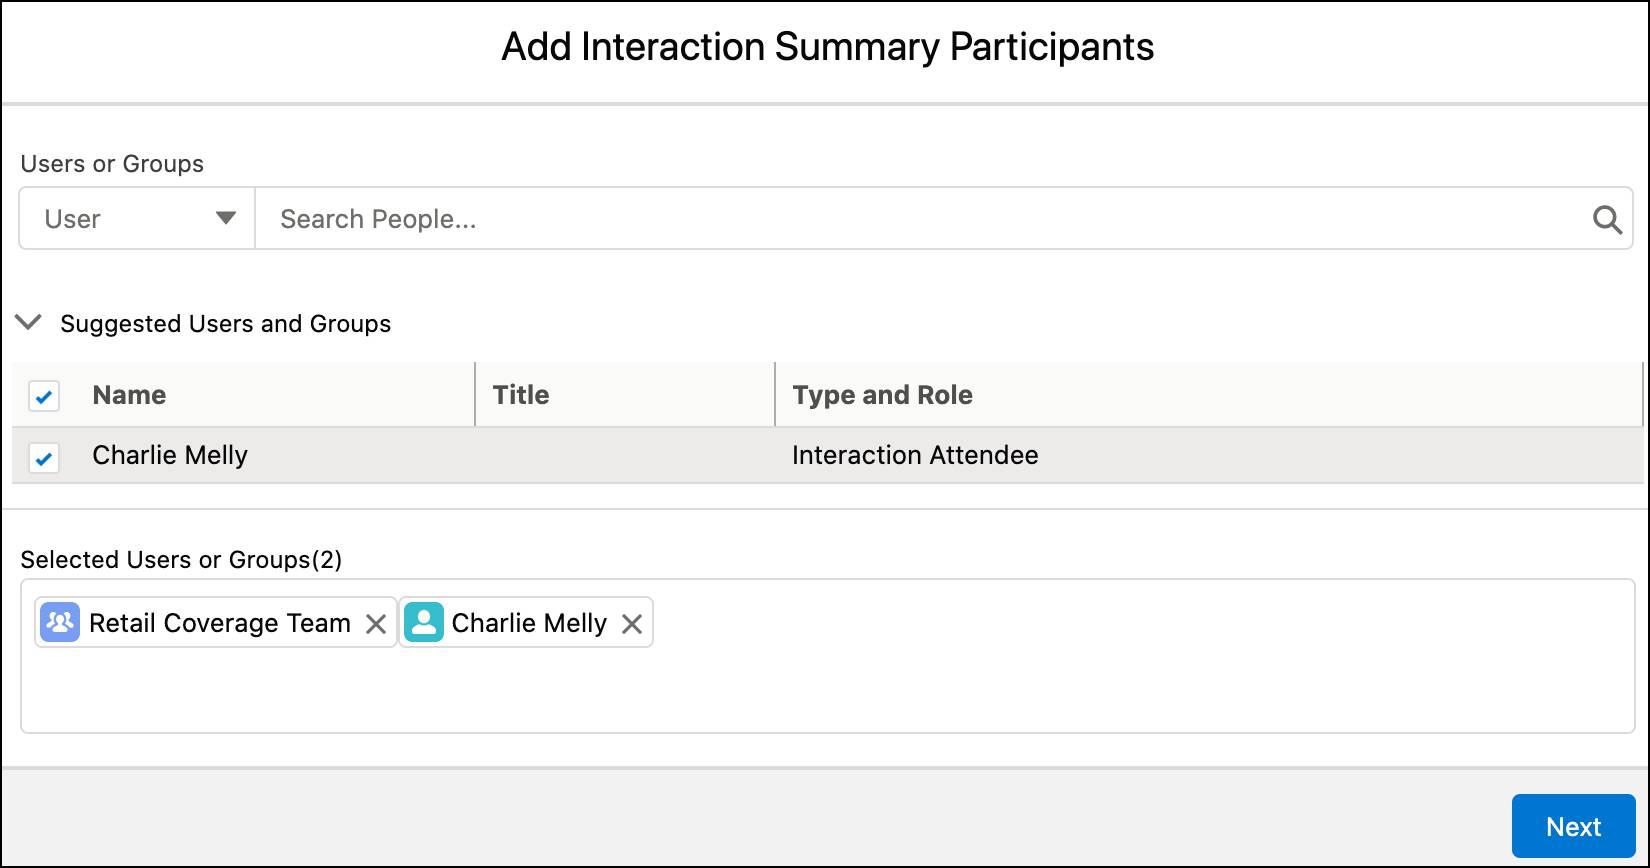 Add Interaction Summary Participants window with users and groups selected.